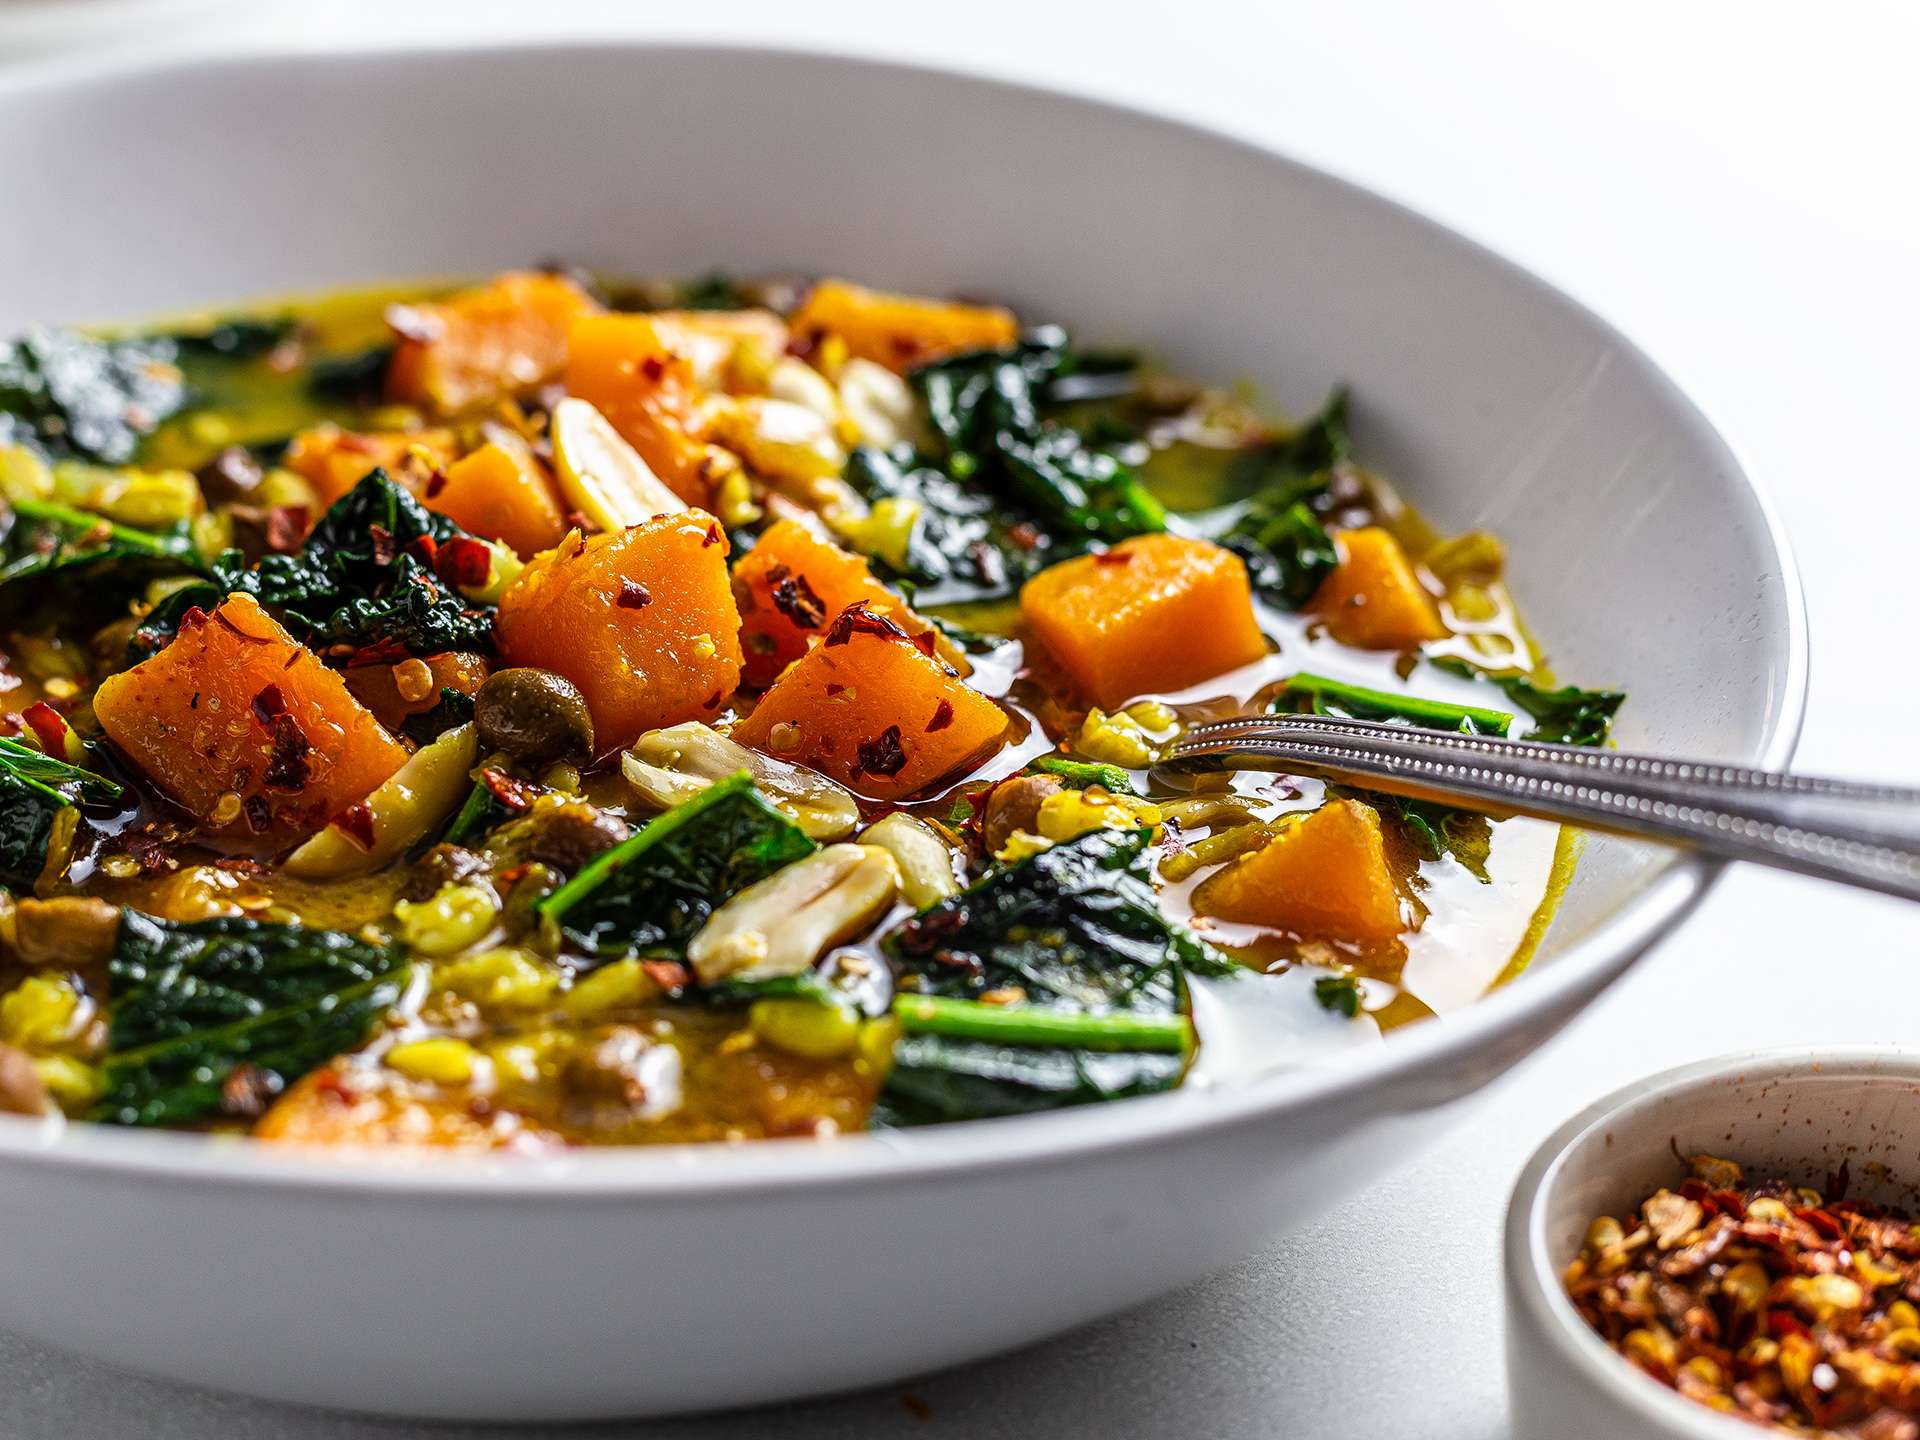 Pumpkin Kale Soup with Brown Chickpeas